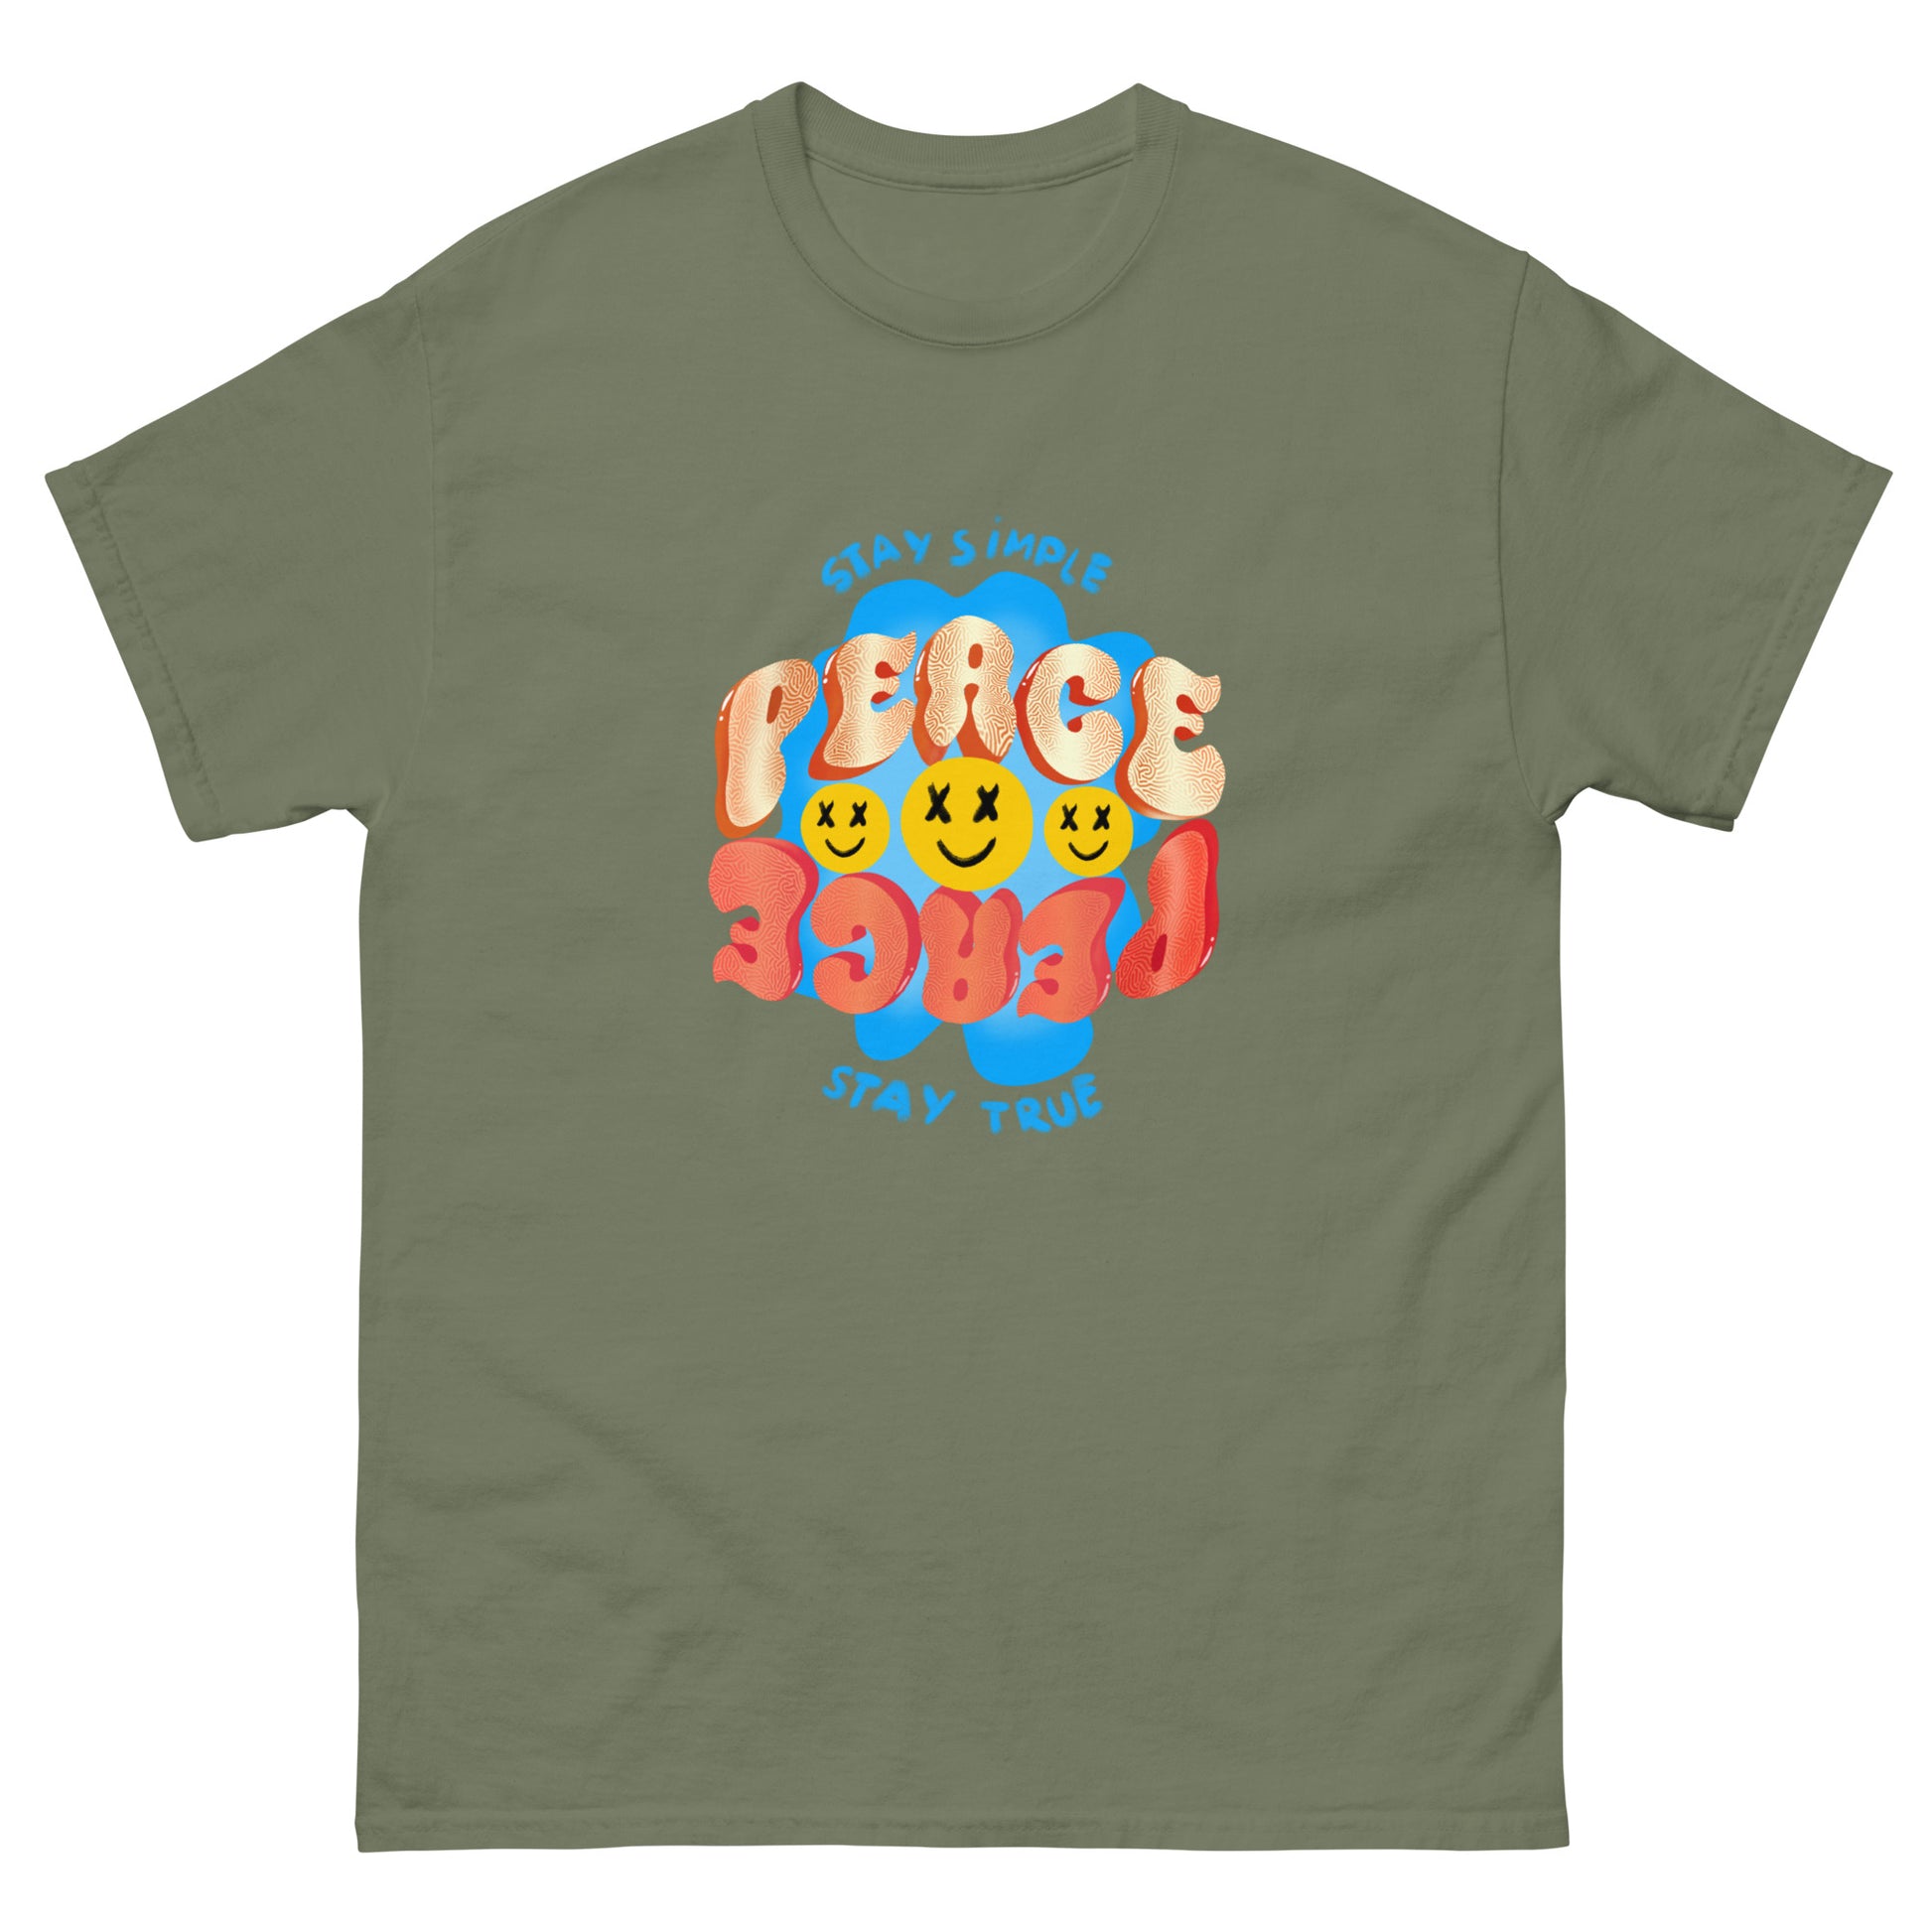 military green color cotton t shirt with colorful print